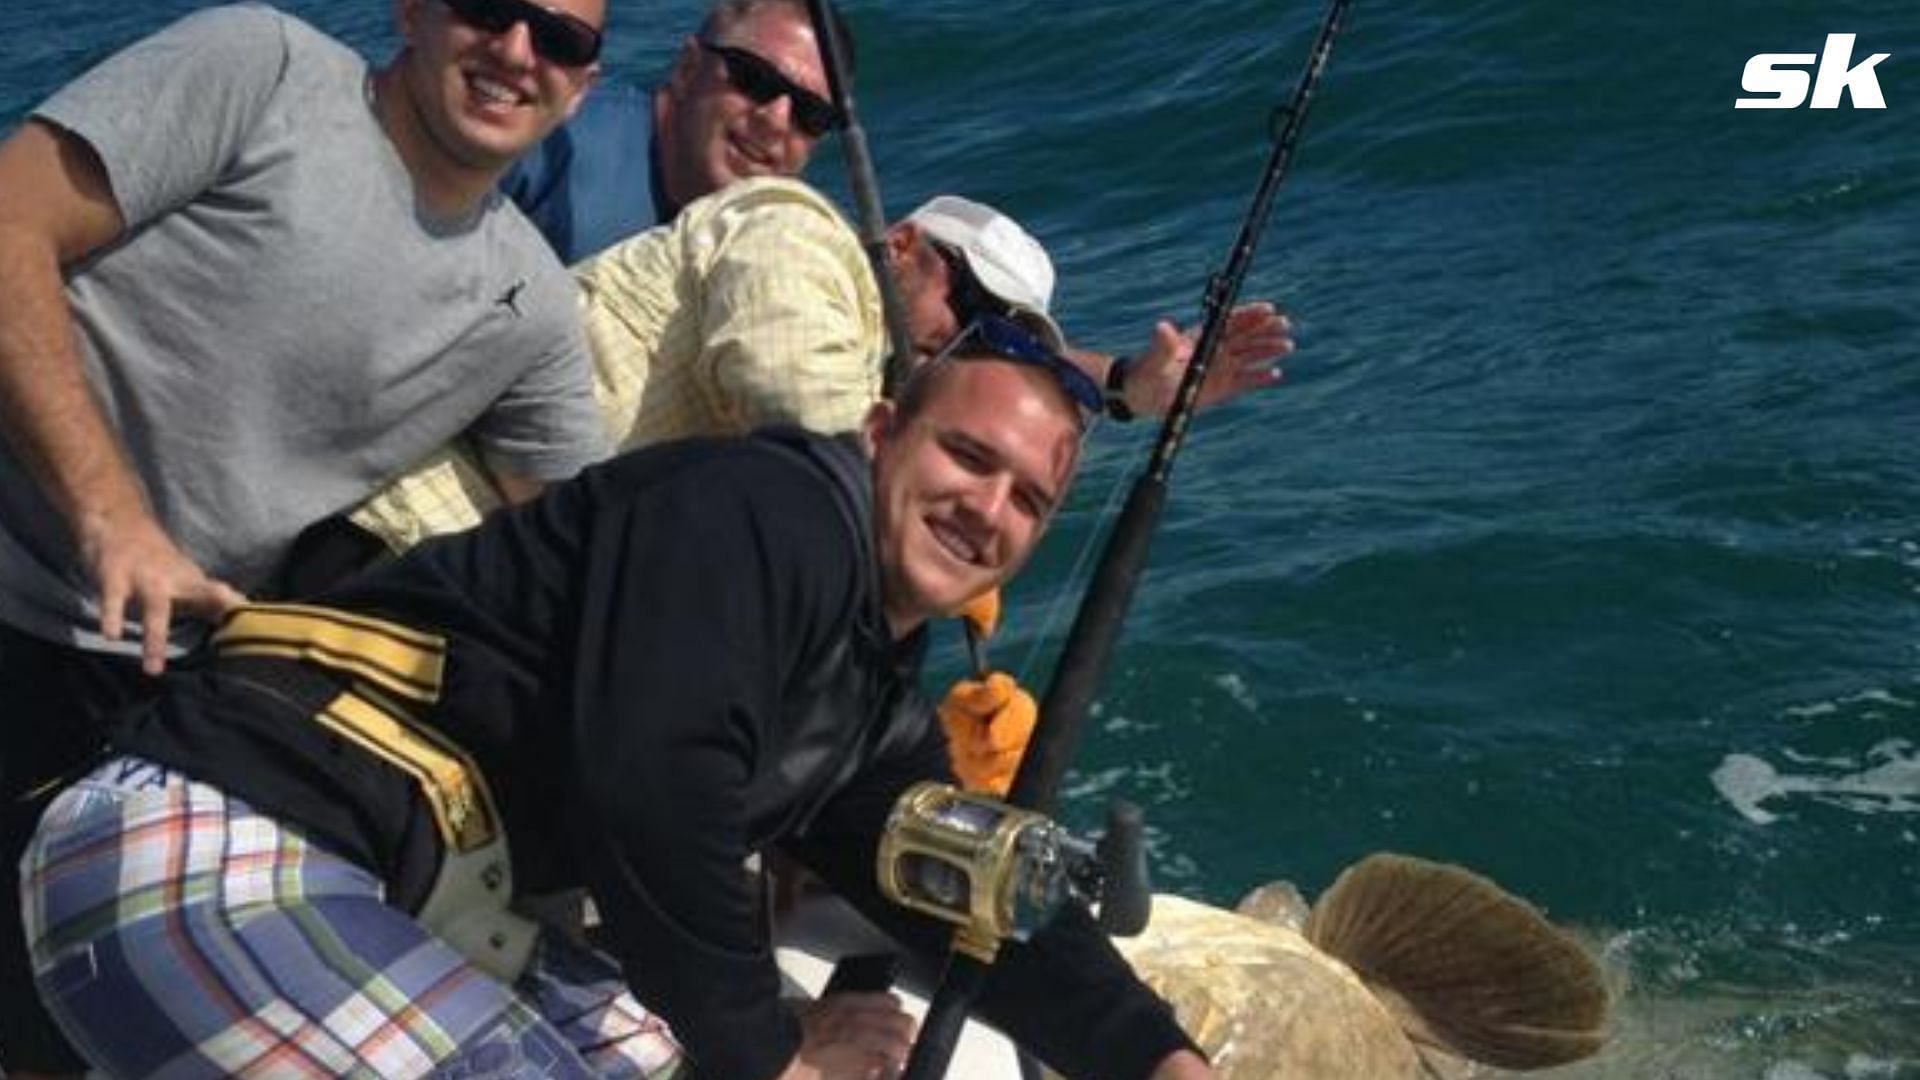 When MLB Superstar Mike Trout recounted his experience of catching a giant grouper on a family fishing trip